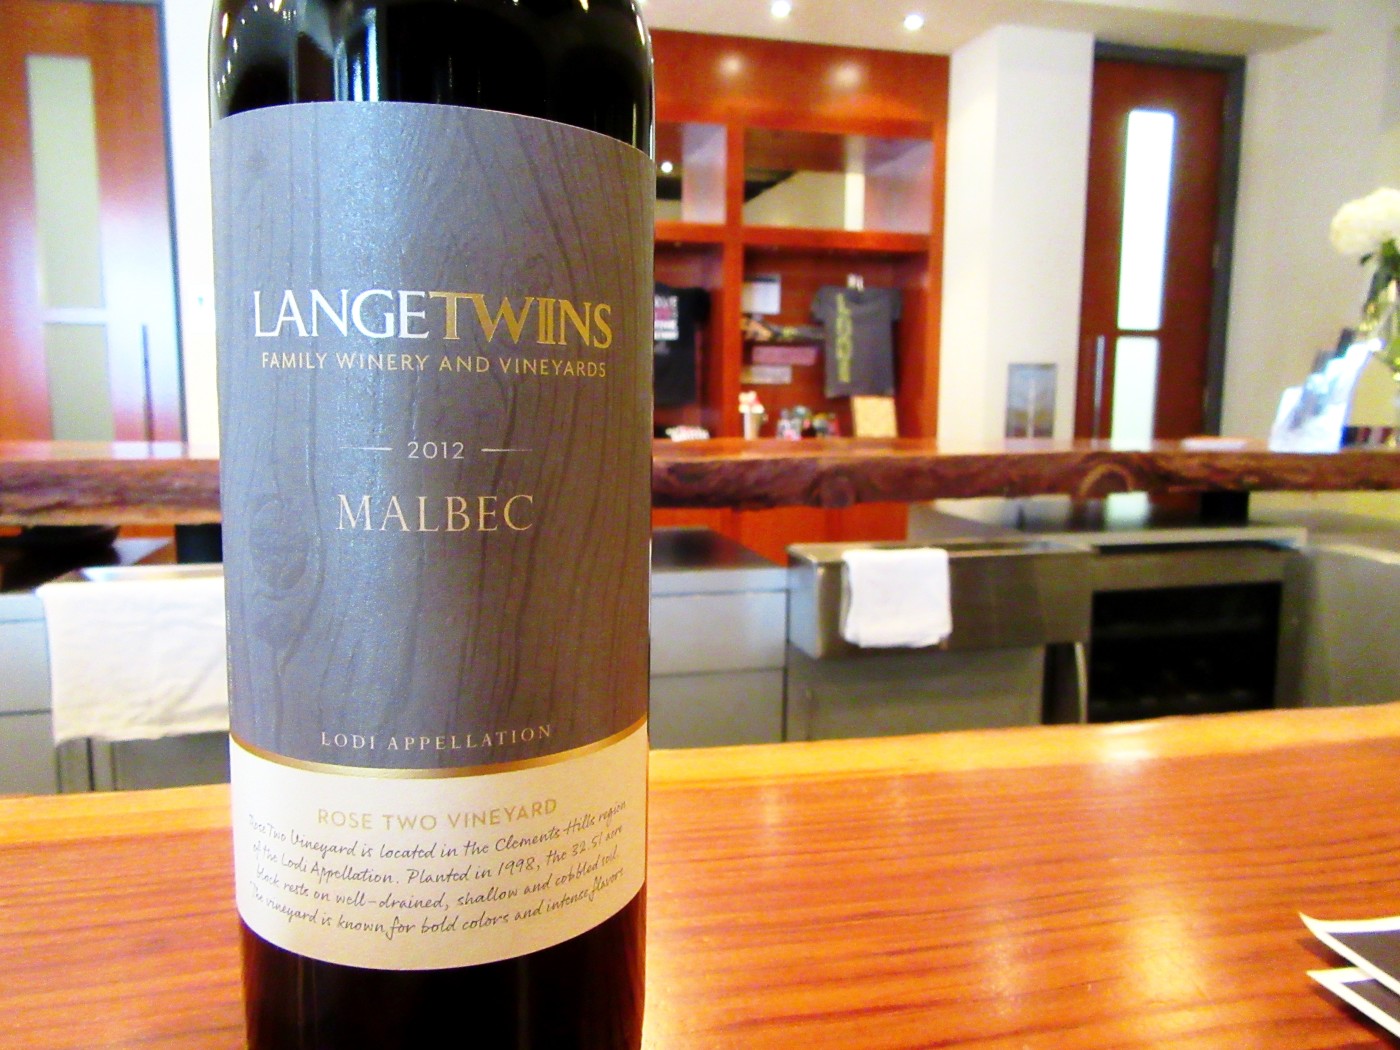 LangeTwins Family Winery and Vineyards, Malbec 2012, Lodi, California, Wine Casual